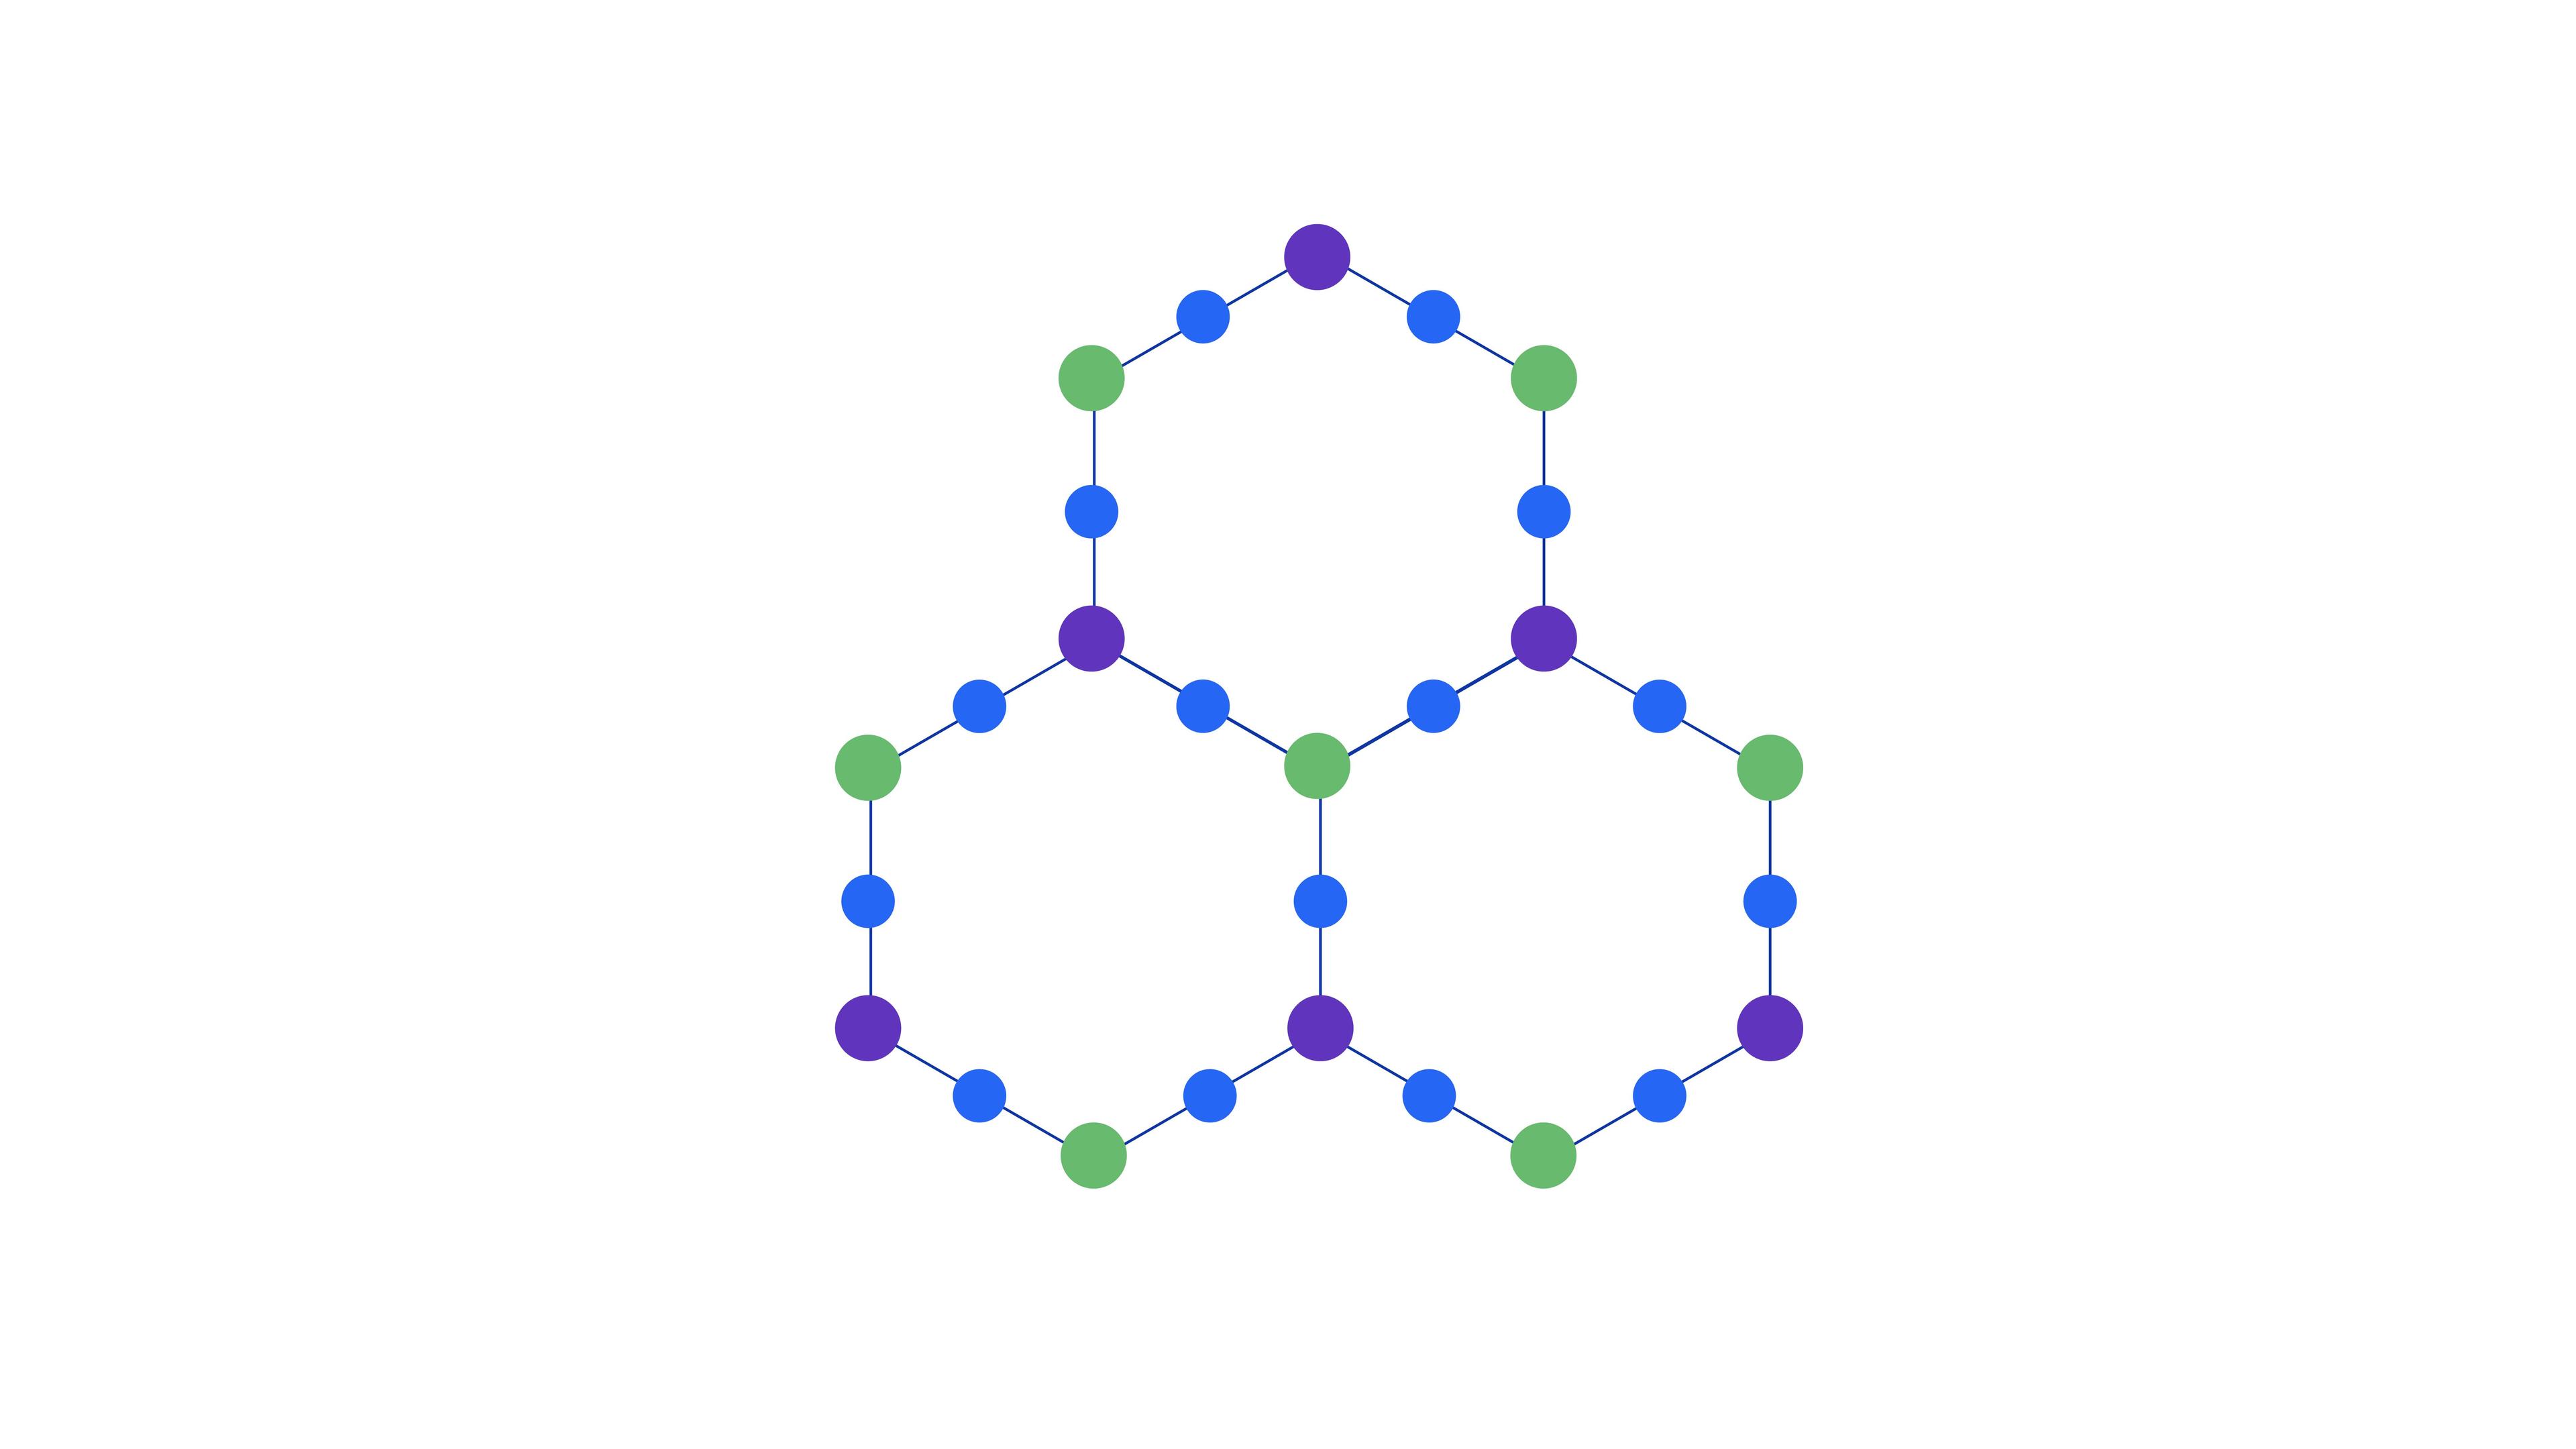 Three unit cells of the heavy-hex lattice. Colors indicate the pattern of three distinct frequencies for control (dark blue) and two sets of target qubits (green and purple).